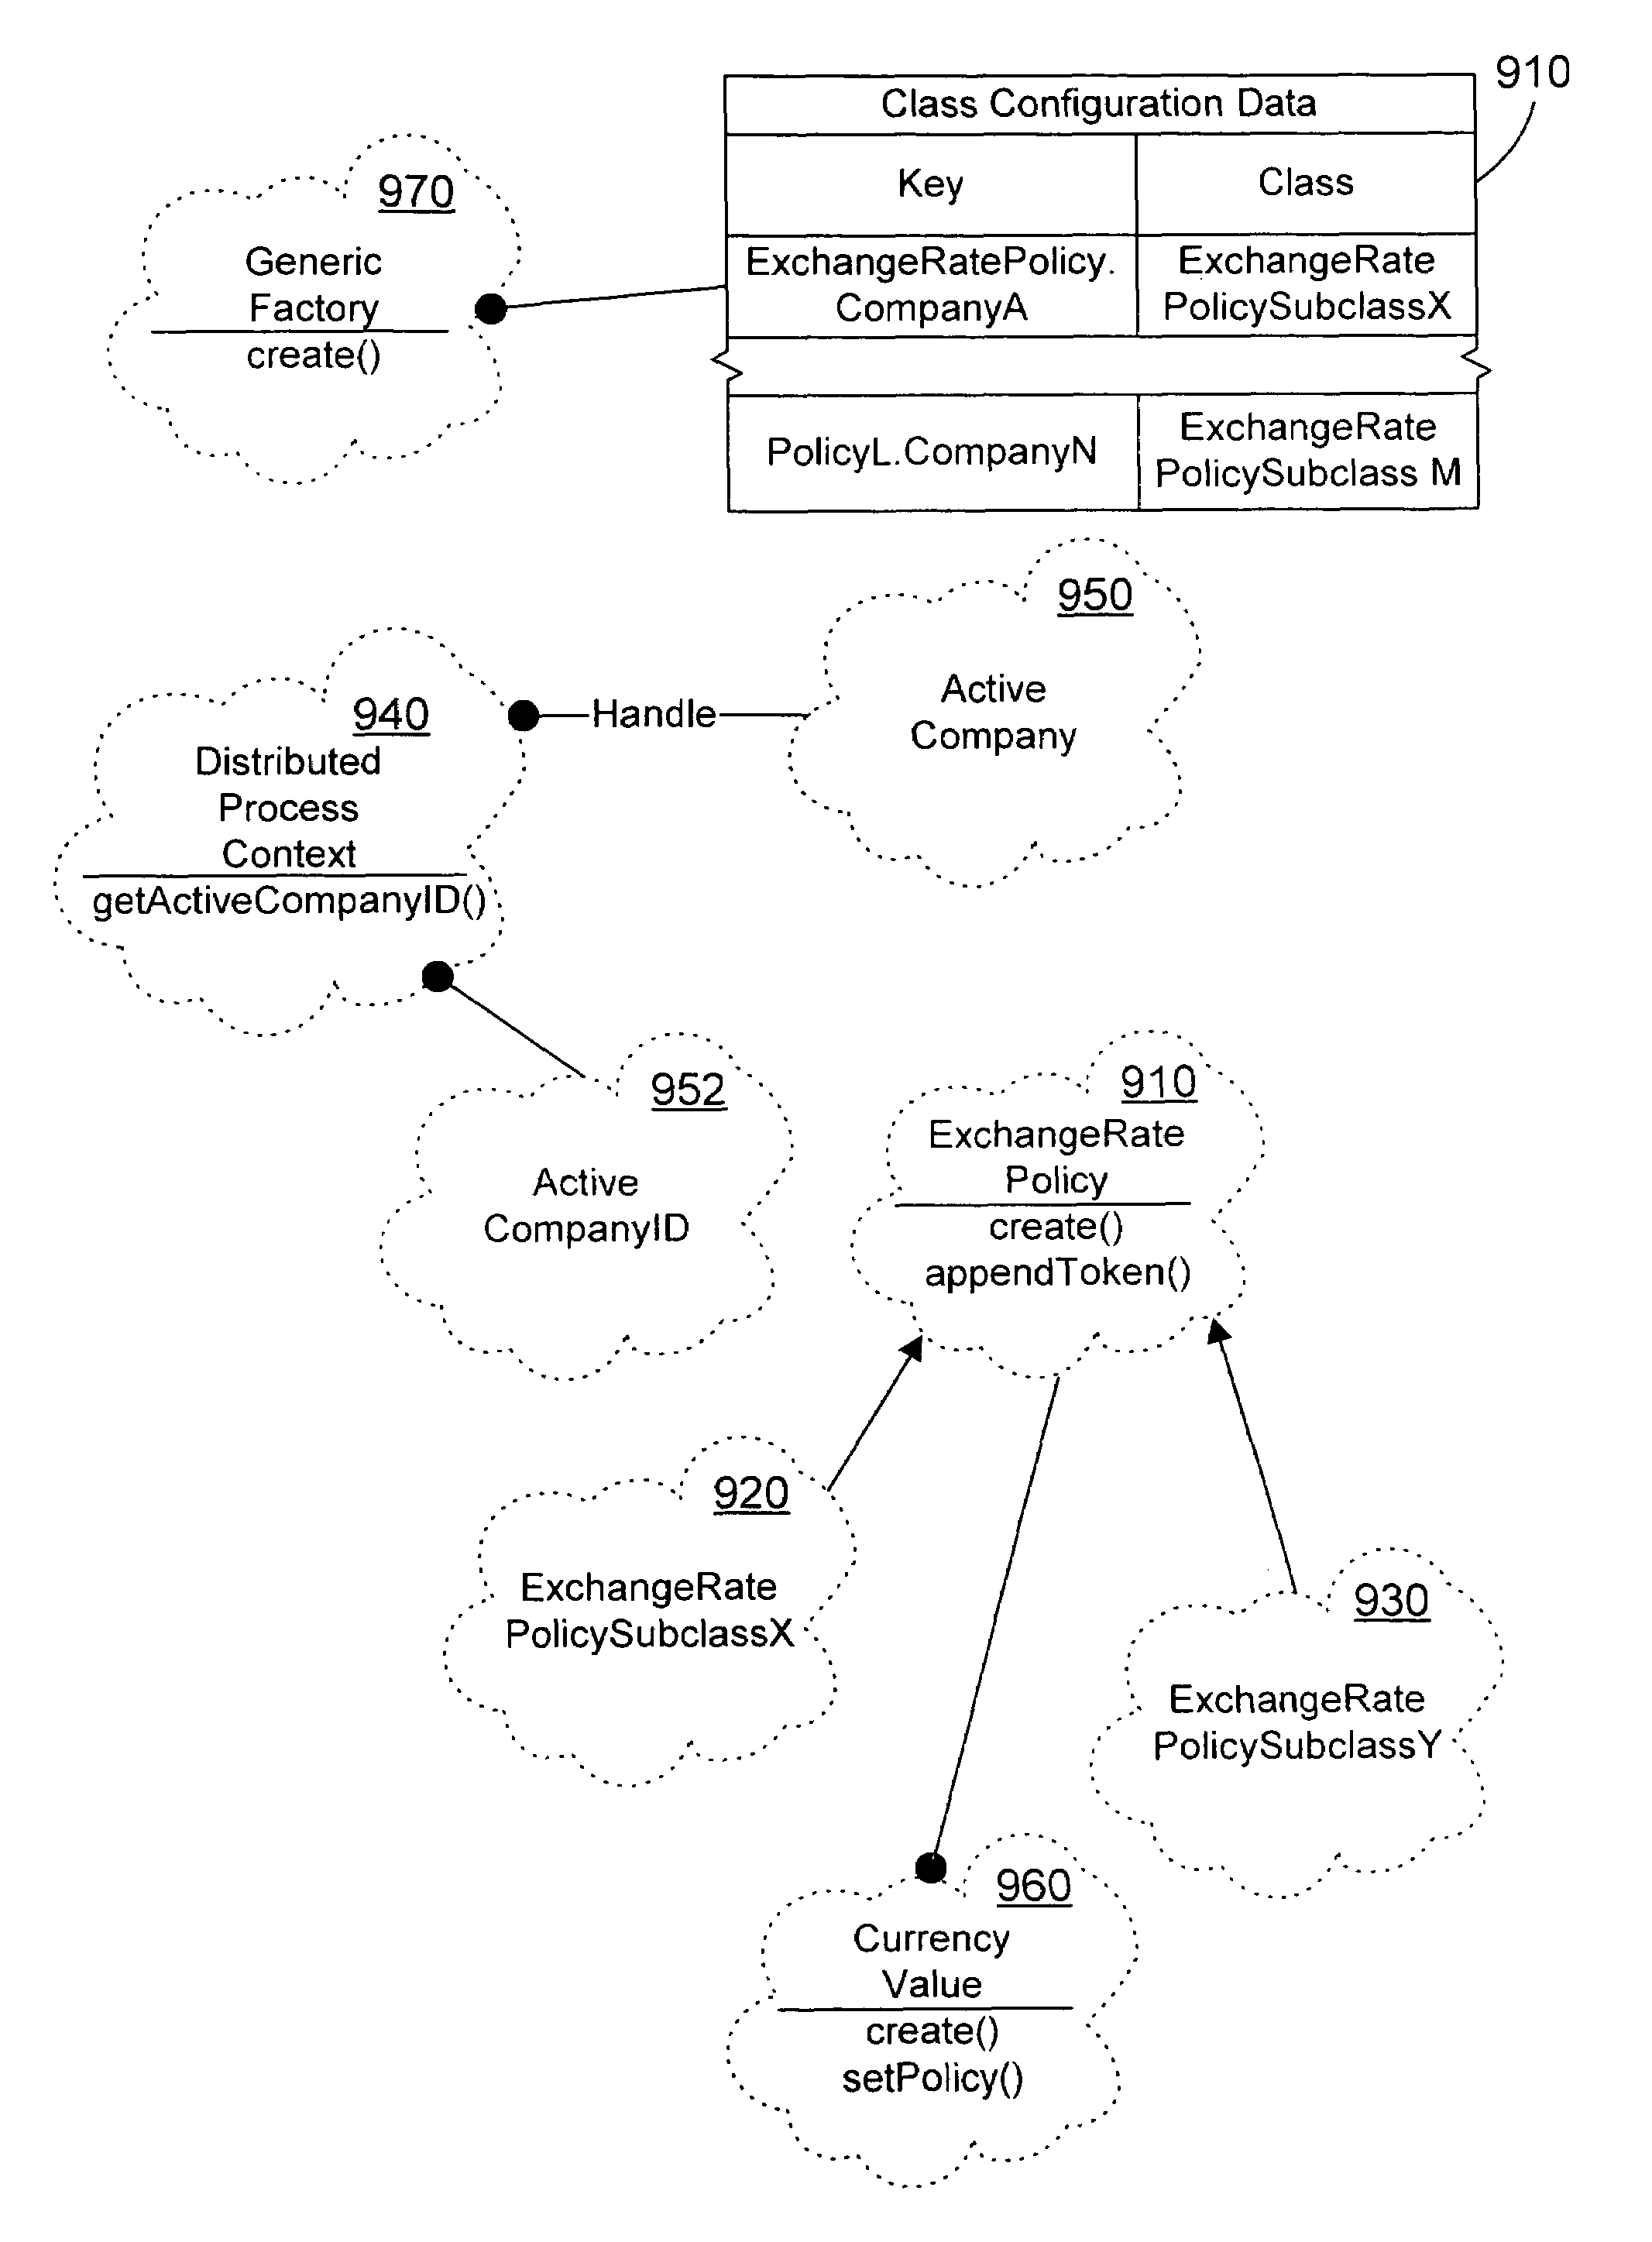 Object oriented apparatus and method for providing context-based class replacement in an object oriented system